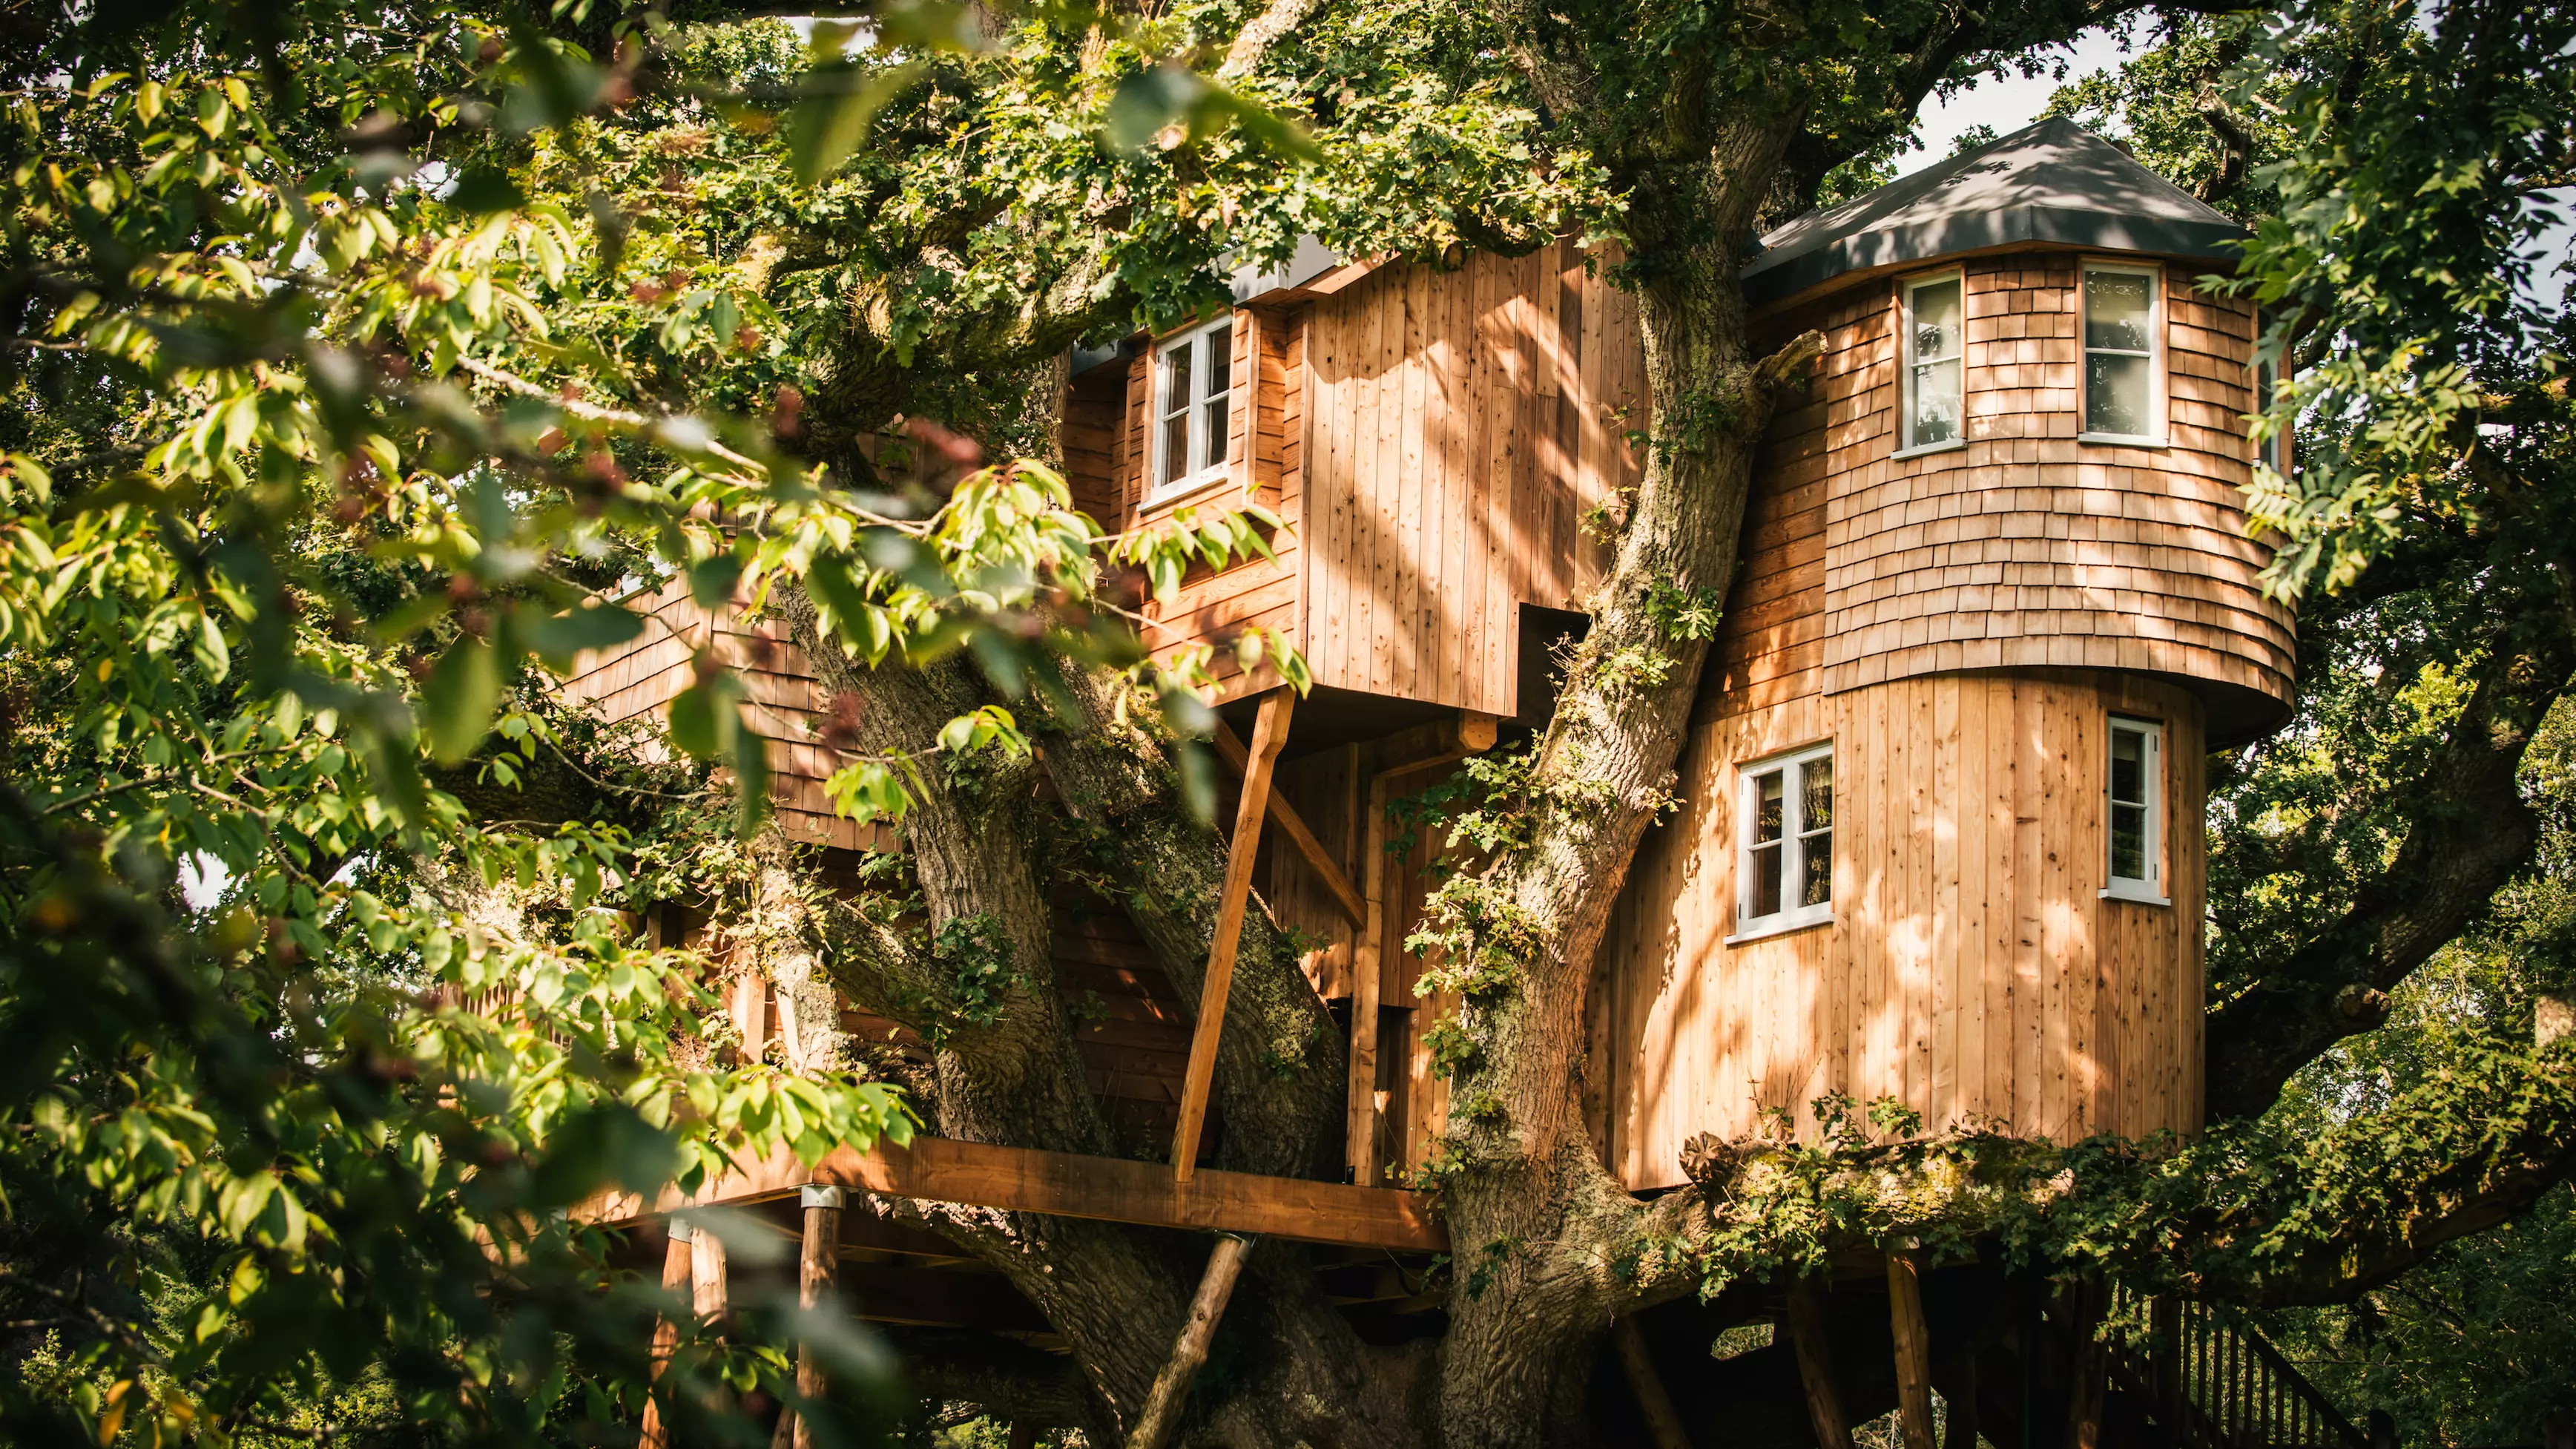 You Can Stay In An Enchanted Real Life Treehouse And Indulge Your Inner Child